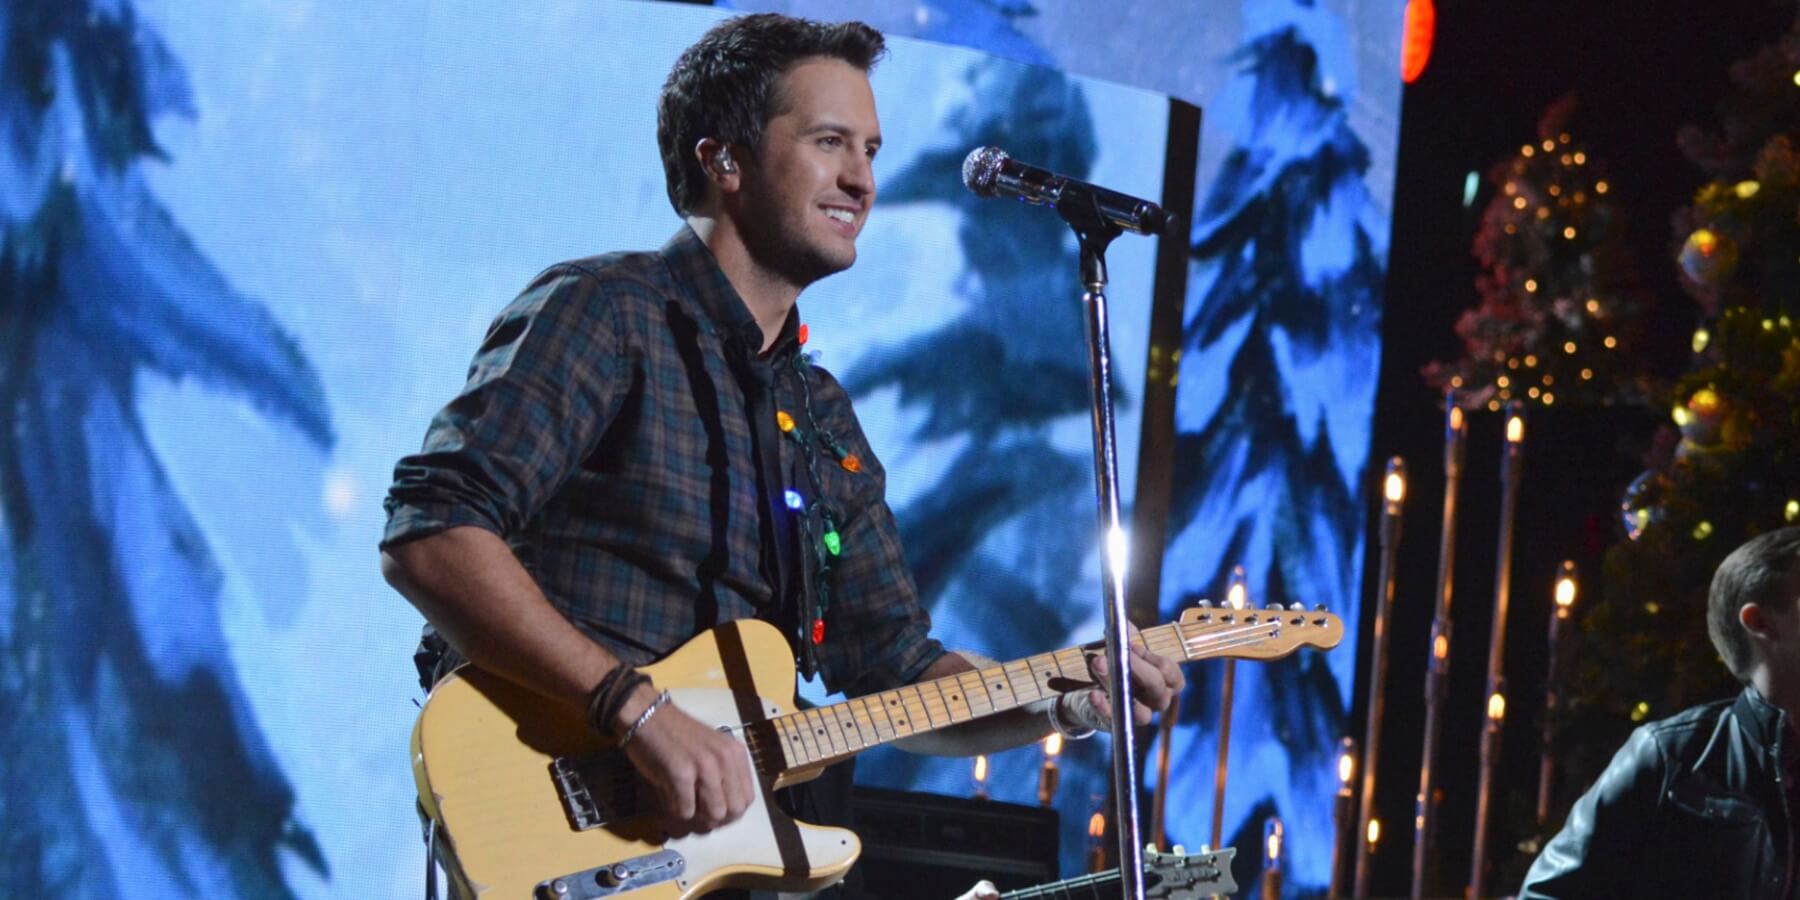 Luke Bryan performs in front of a Christmas tree.